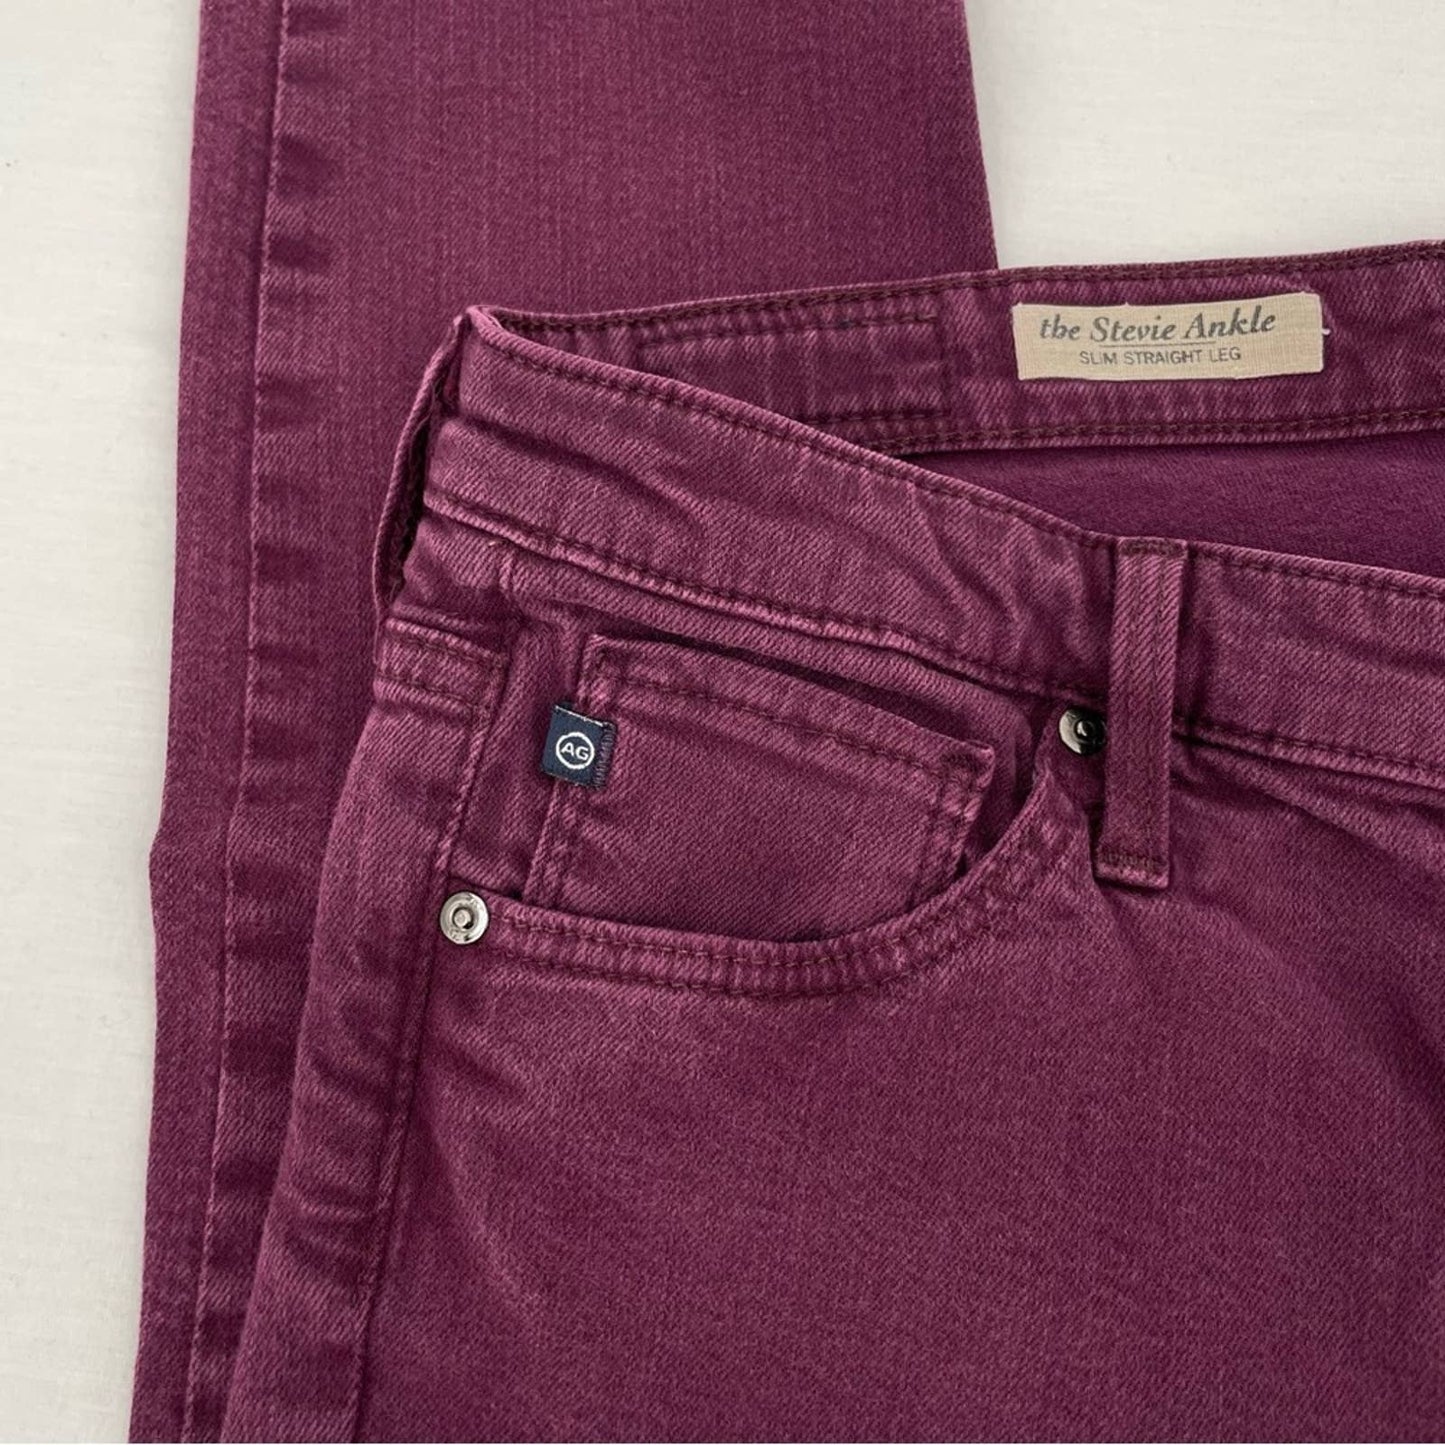 AG Adriano Goldschmied The Stevie Ankle Slim Straight Leg Purple Plum Jeans Size 27